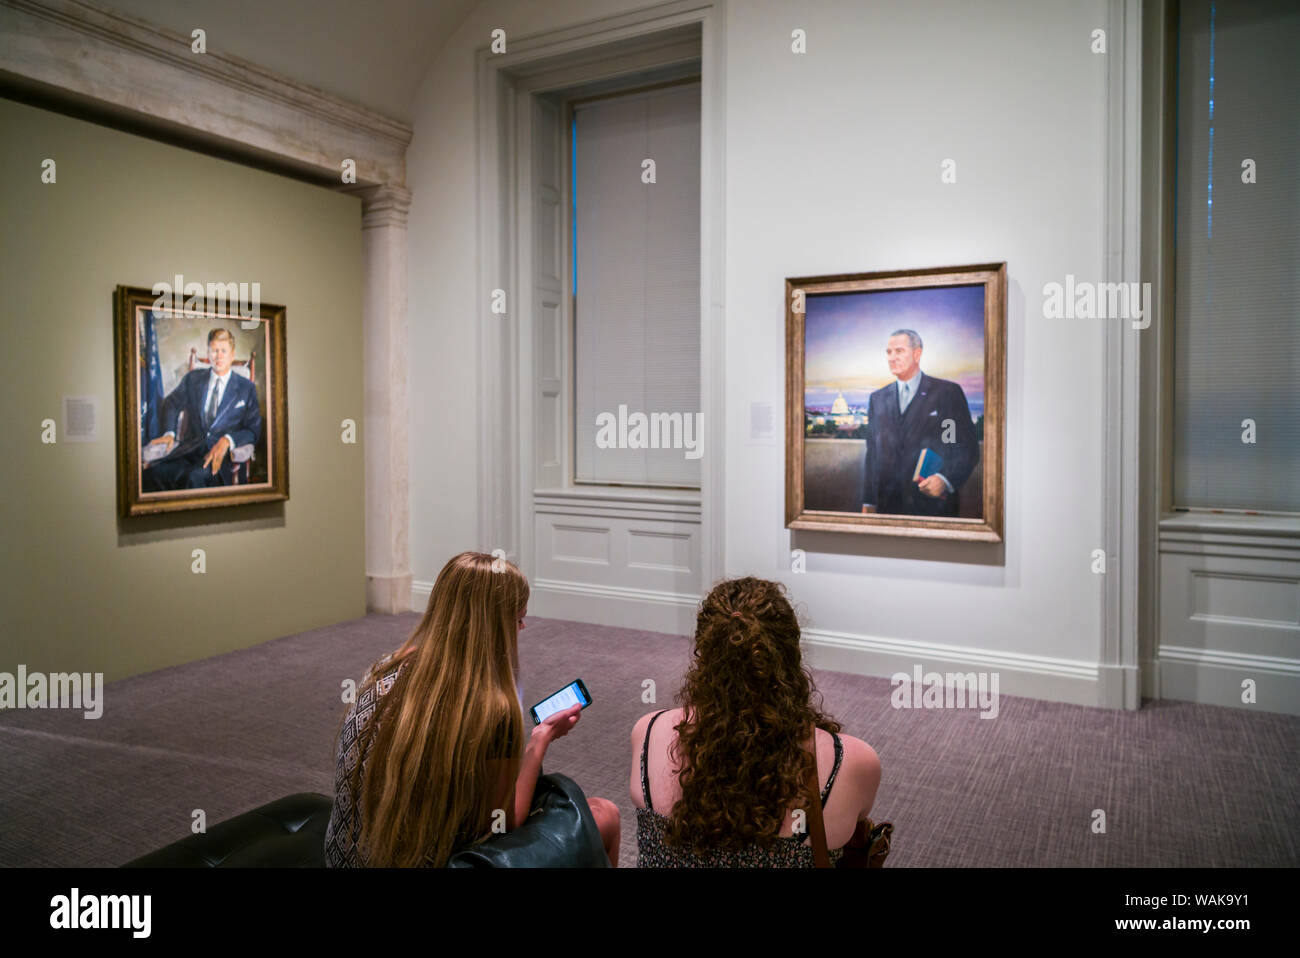 USA, Washington D.C. Reynolds Center for American Art, National Portrait Gallery, portraits of Presidents John F. Kennedy by William Draper and Lyndon B. Johnson by Peter Hurd (Editorial Use Only) Stock Photo